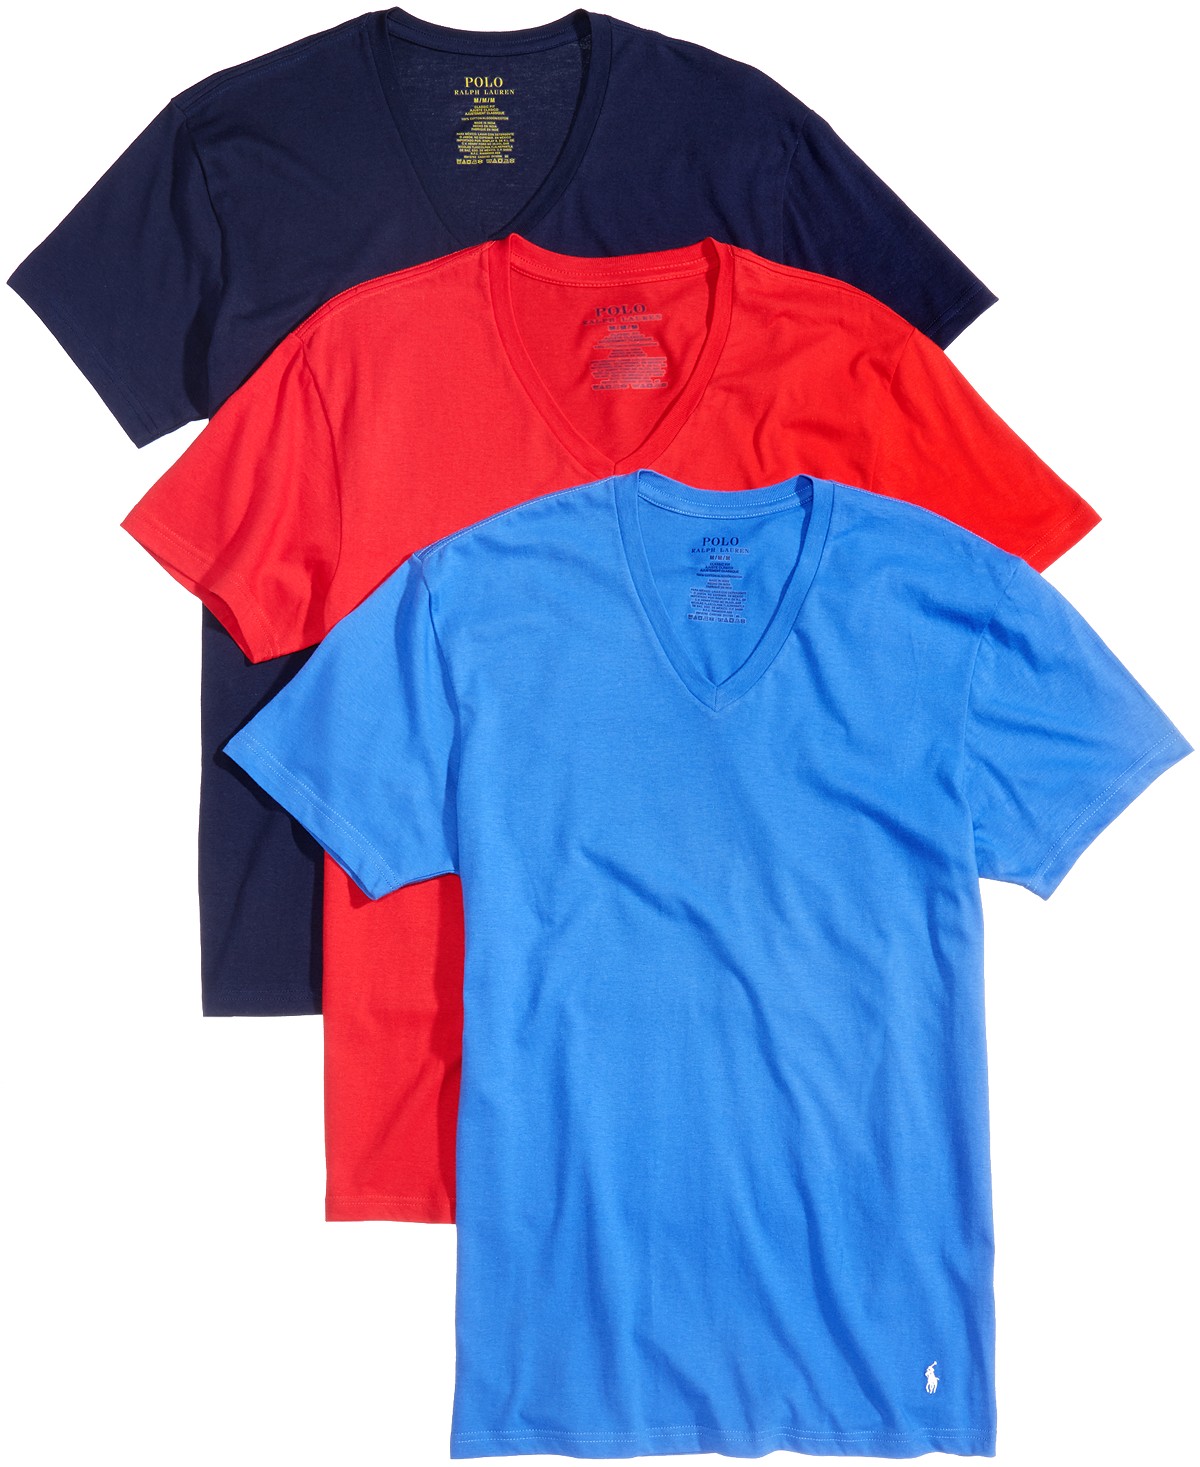 Polo Ralph Lauren men’s 3-pack of t-shirts for $21